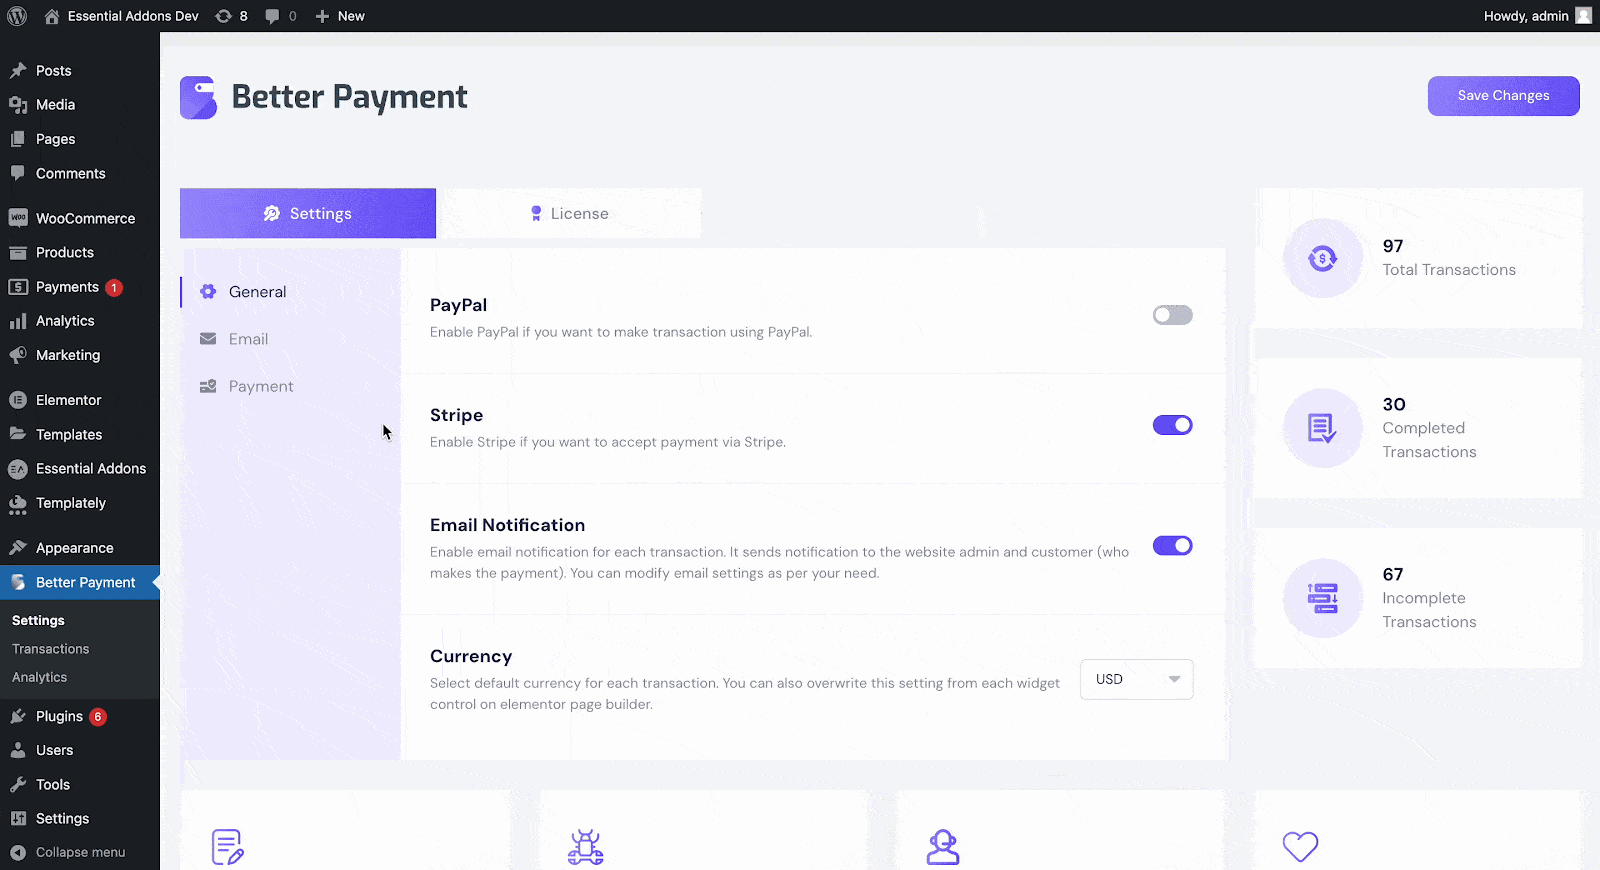 Email Notifications In Better Payment